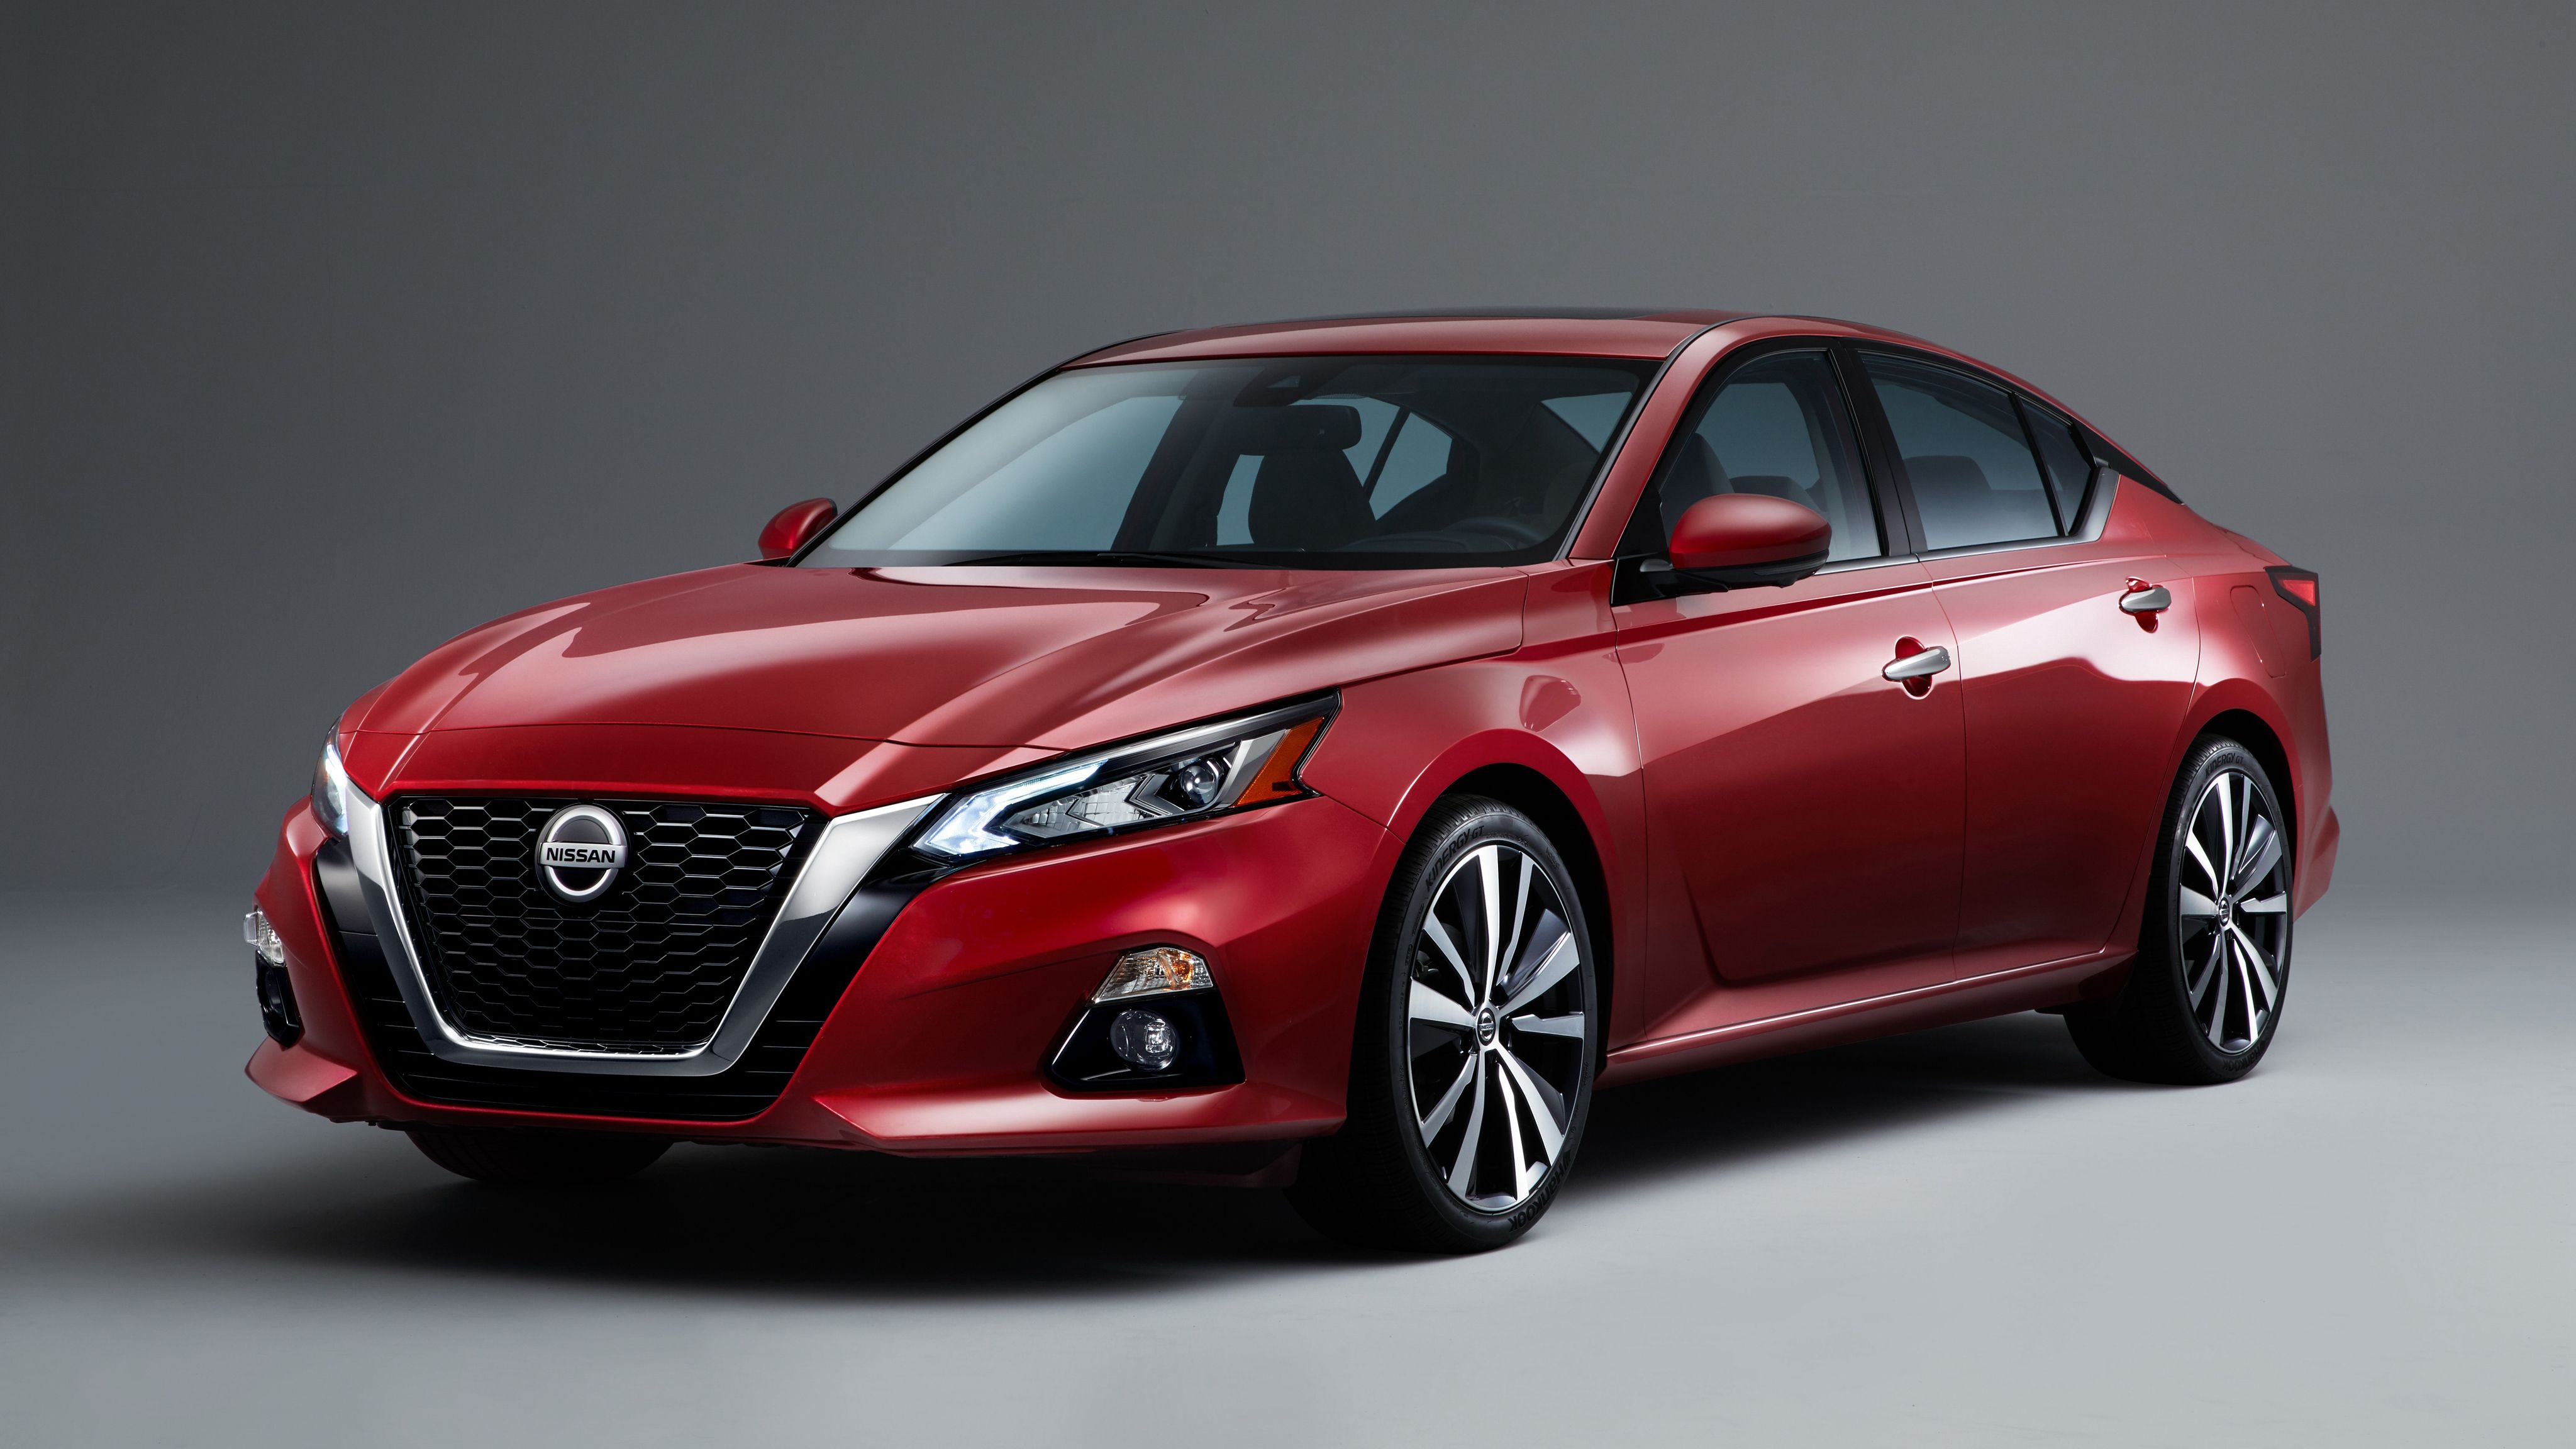 Nissan Altima Wallpapers